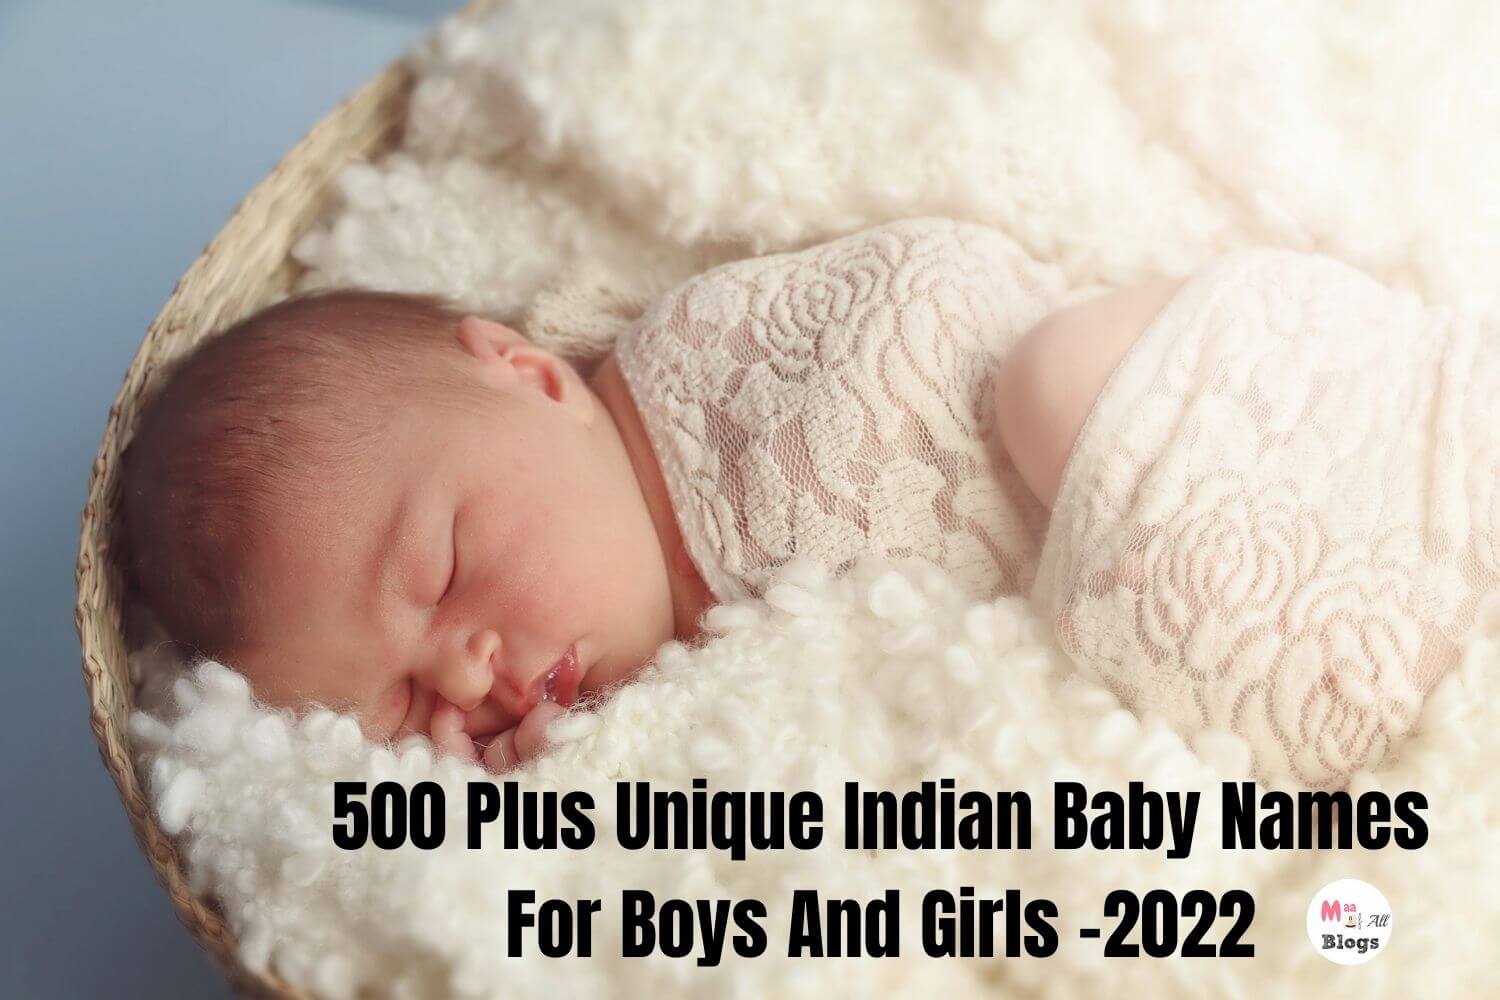 500 Plus Unique Indian Baby Names For Boys And Girls 2022